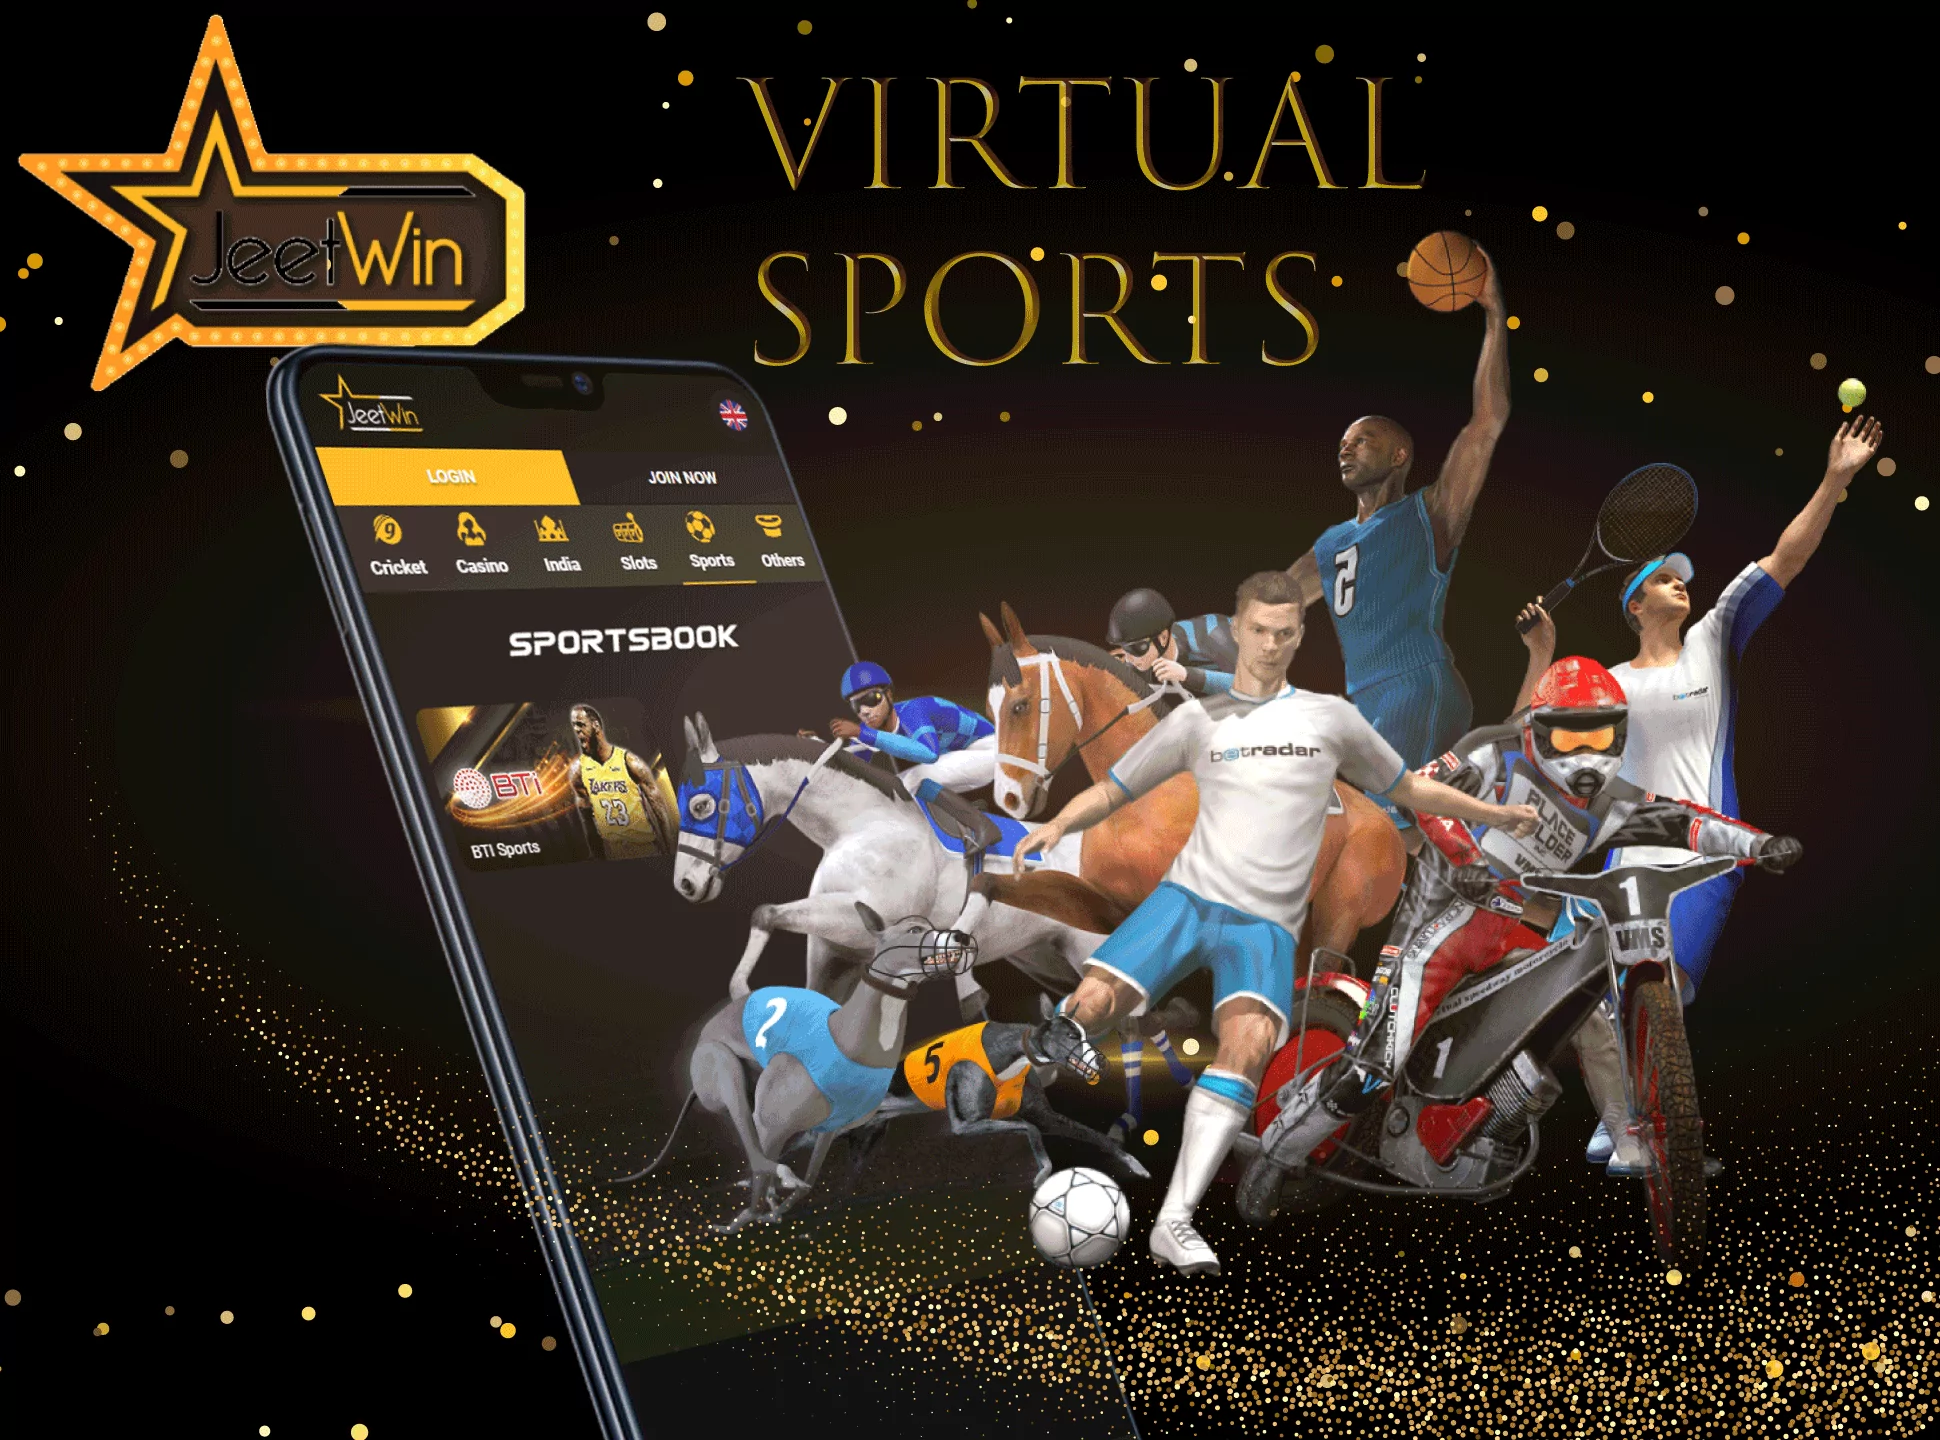 You can also place bets on the virtual sports in the Jeetwin application.